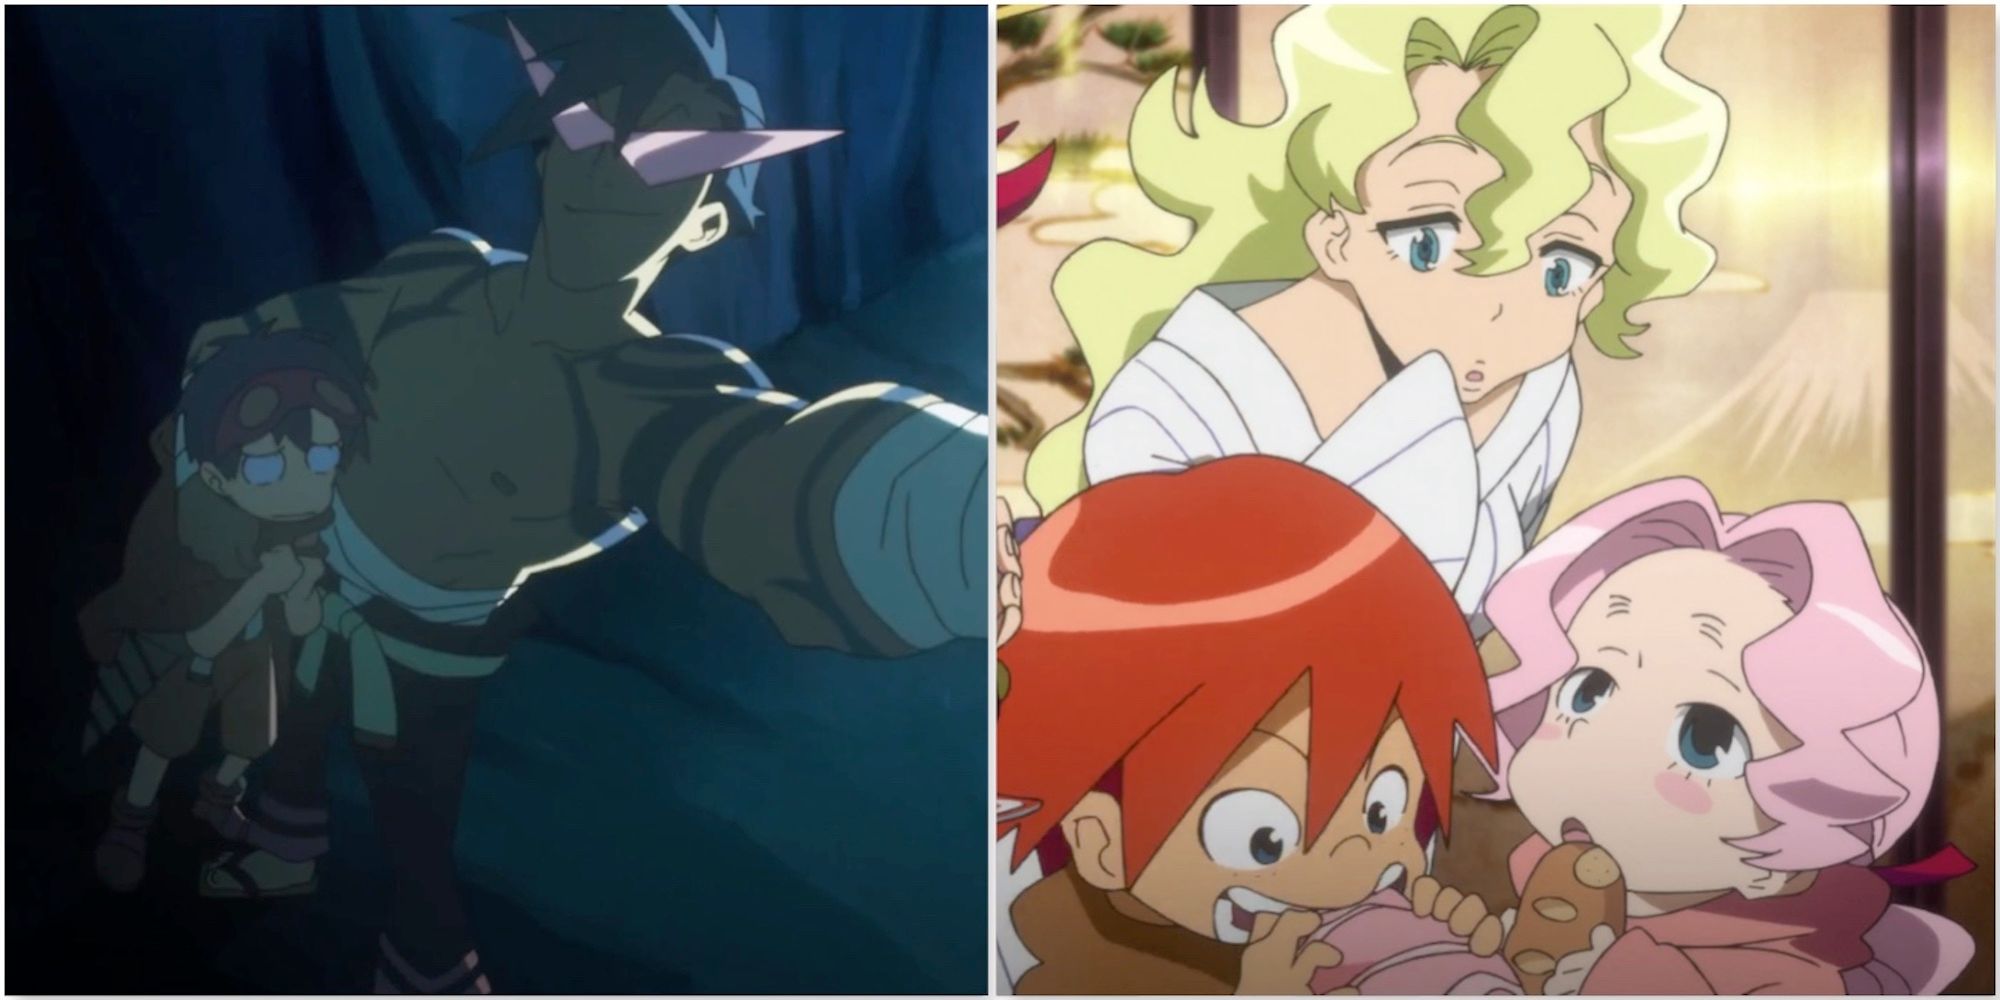 Scenes featuring characters from Gurren Lagann